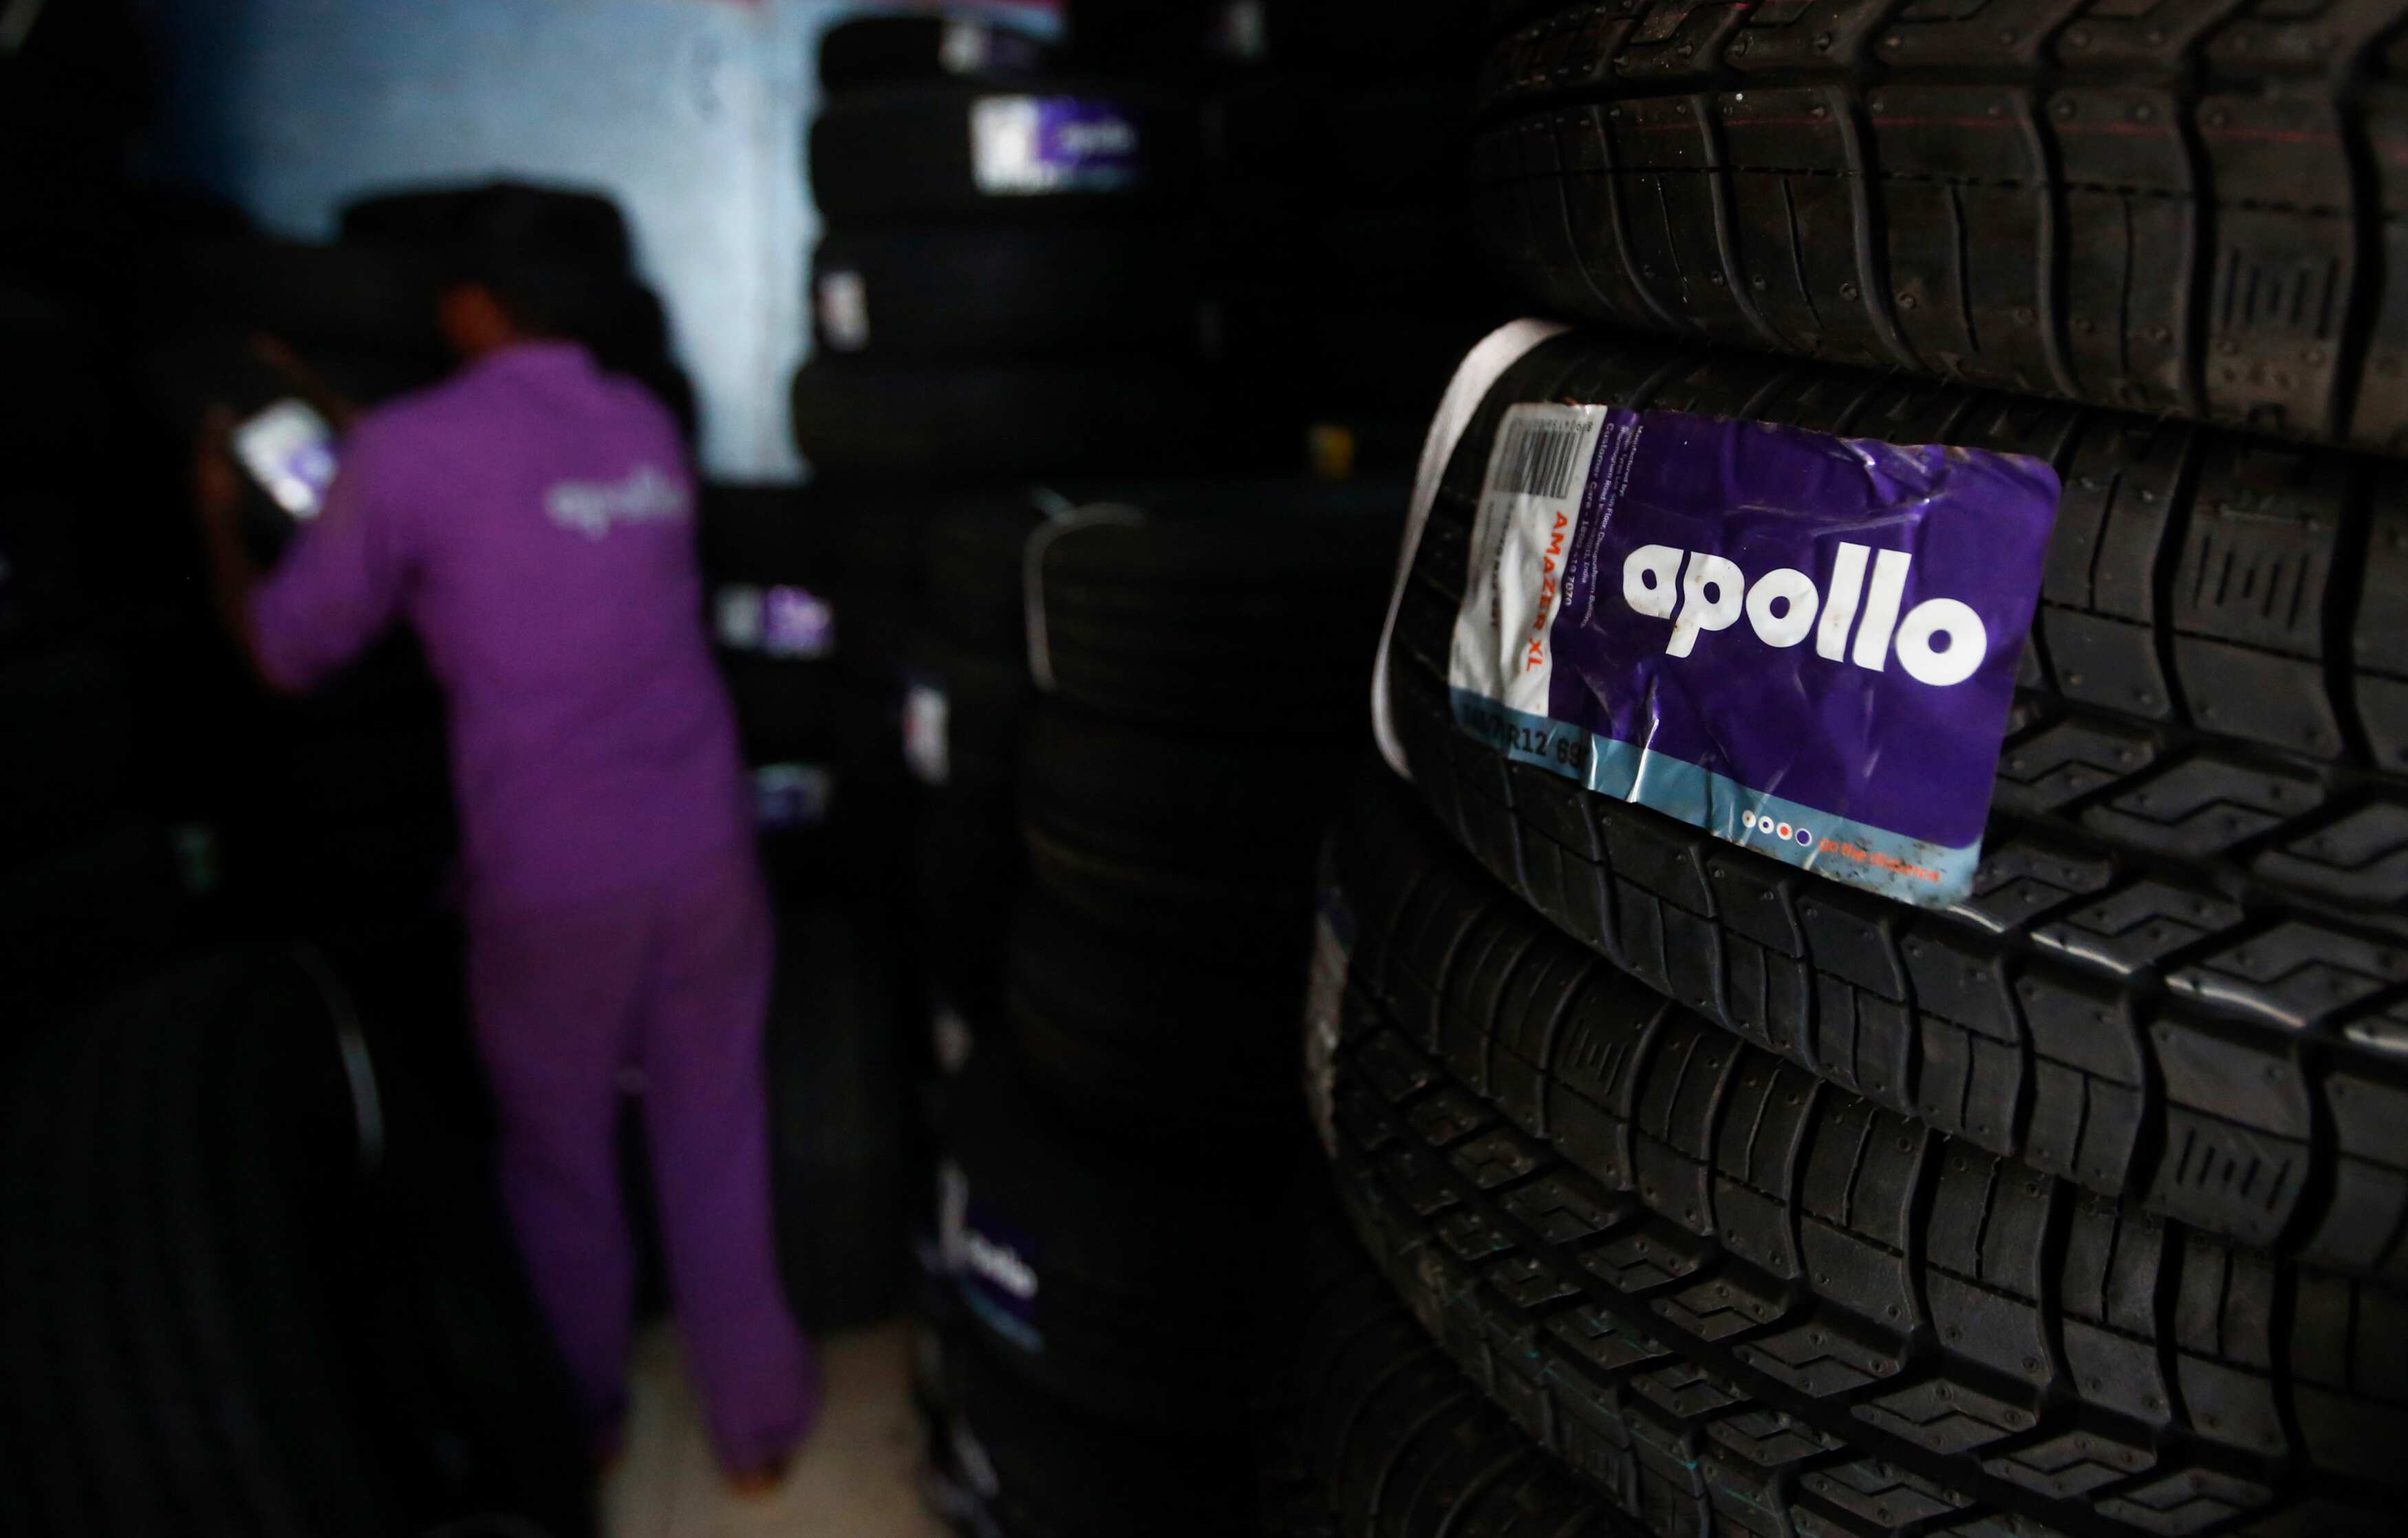 Apollo Tyres Q1 results: Net profit jumps to Rs 397 crore | Zee Business